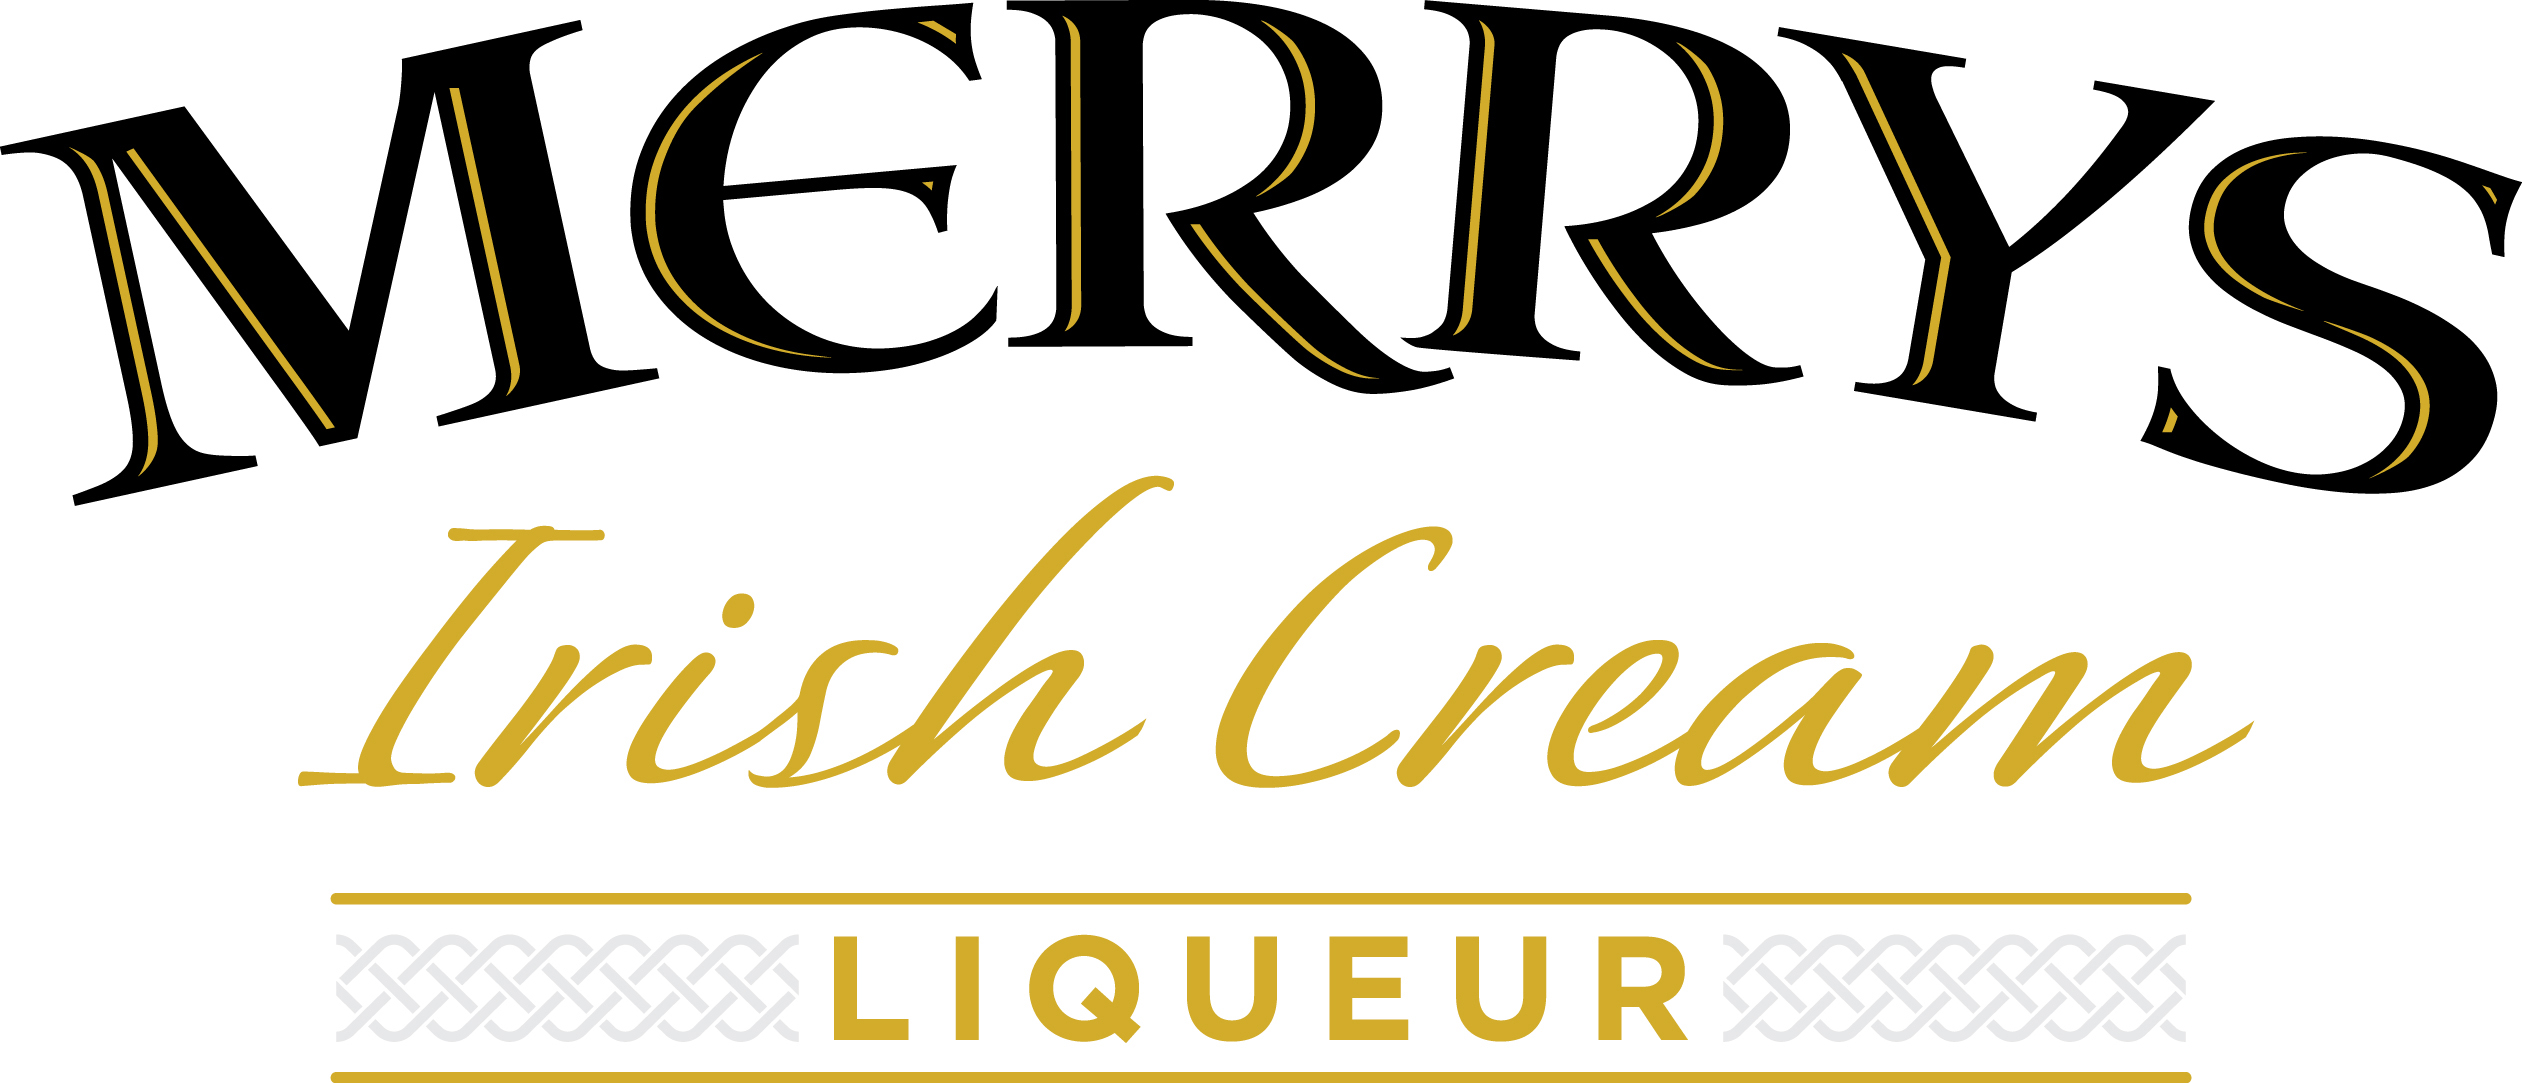 Image of Robert A Merry & Co Limited logotype